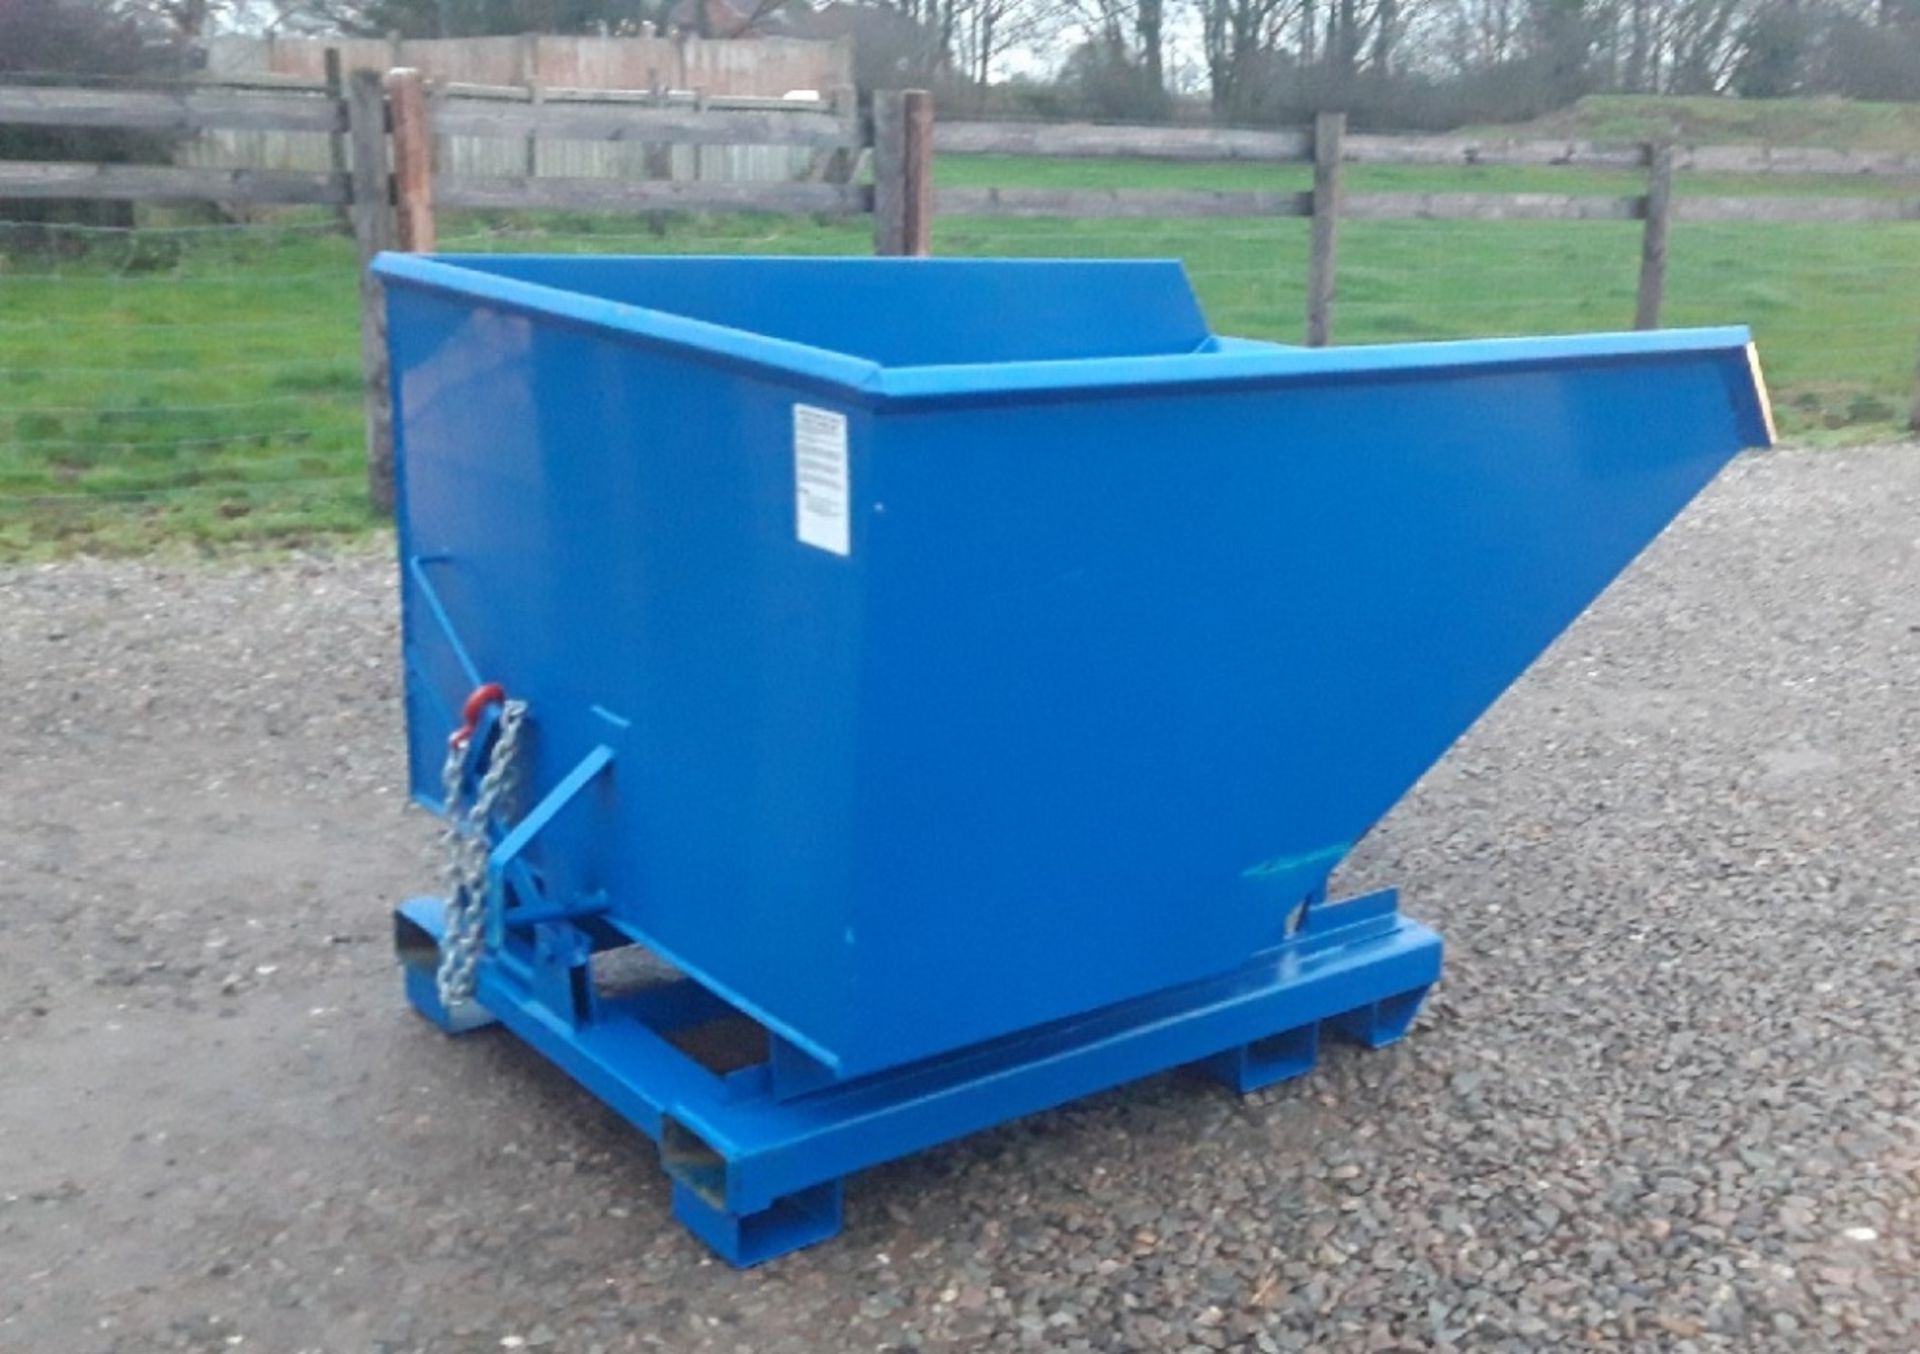 NEW GREEN 1250 LITRE TIP SKIP 4WAY ENTRY - Image 5 of 8